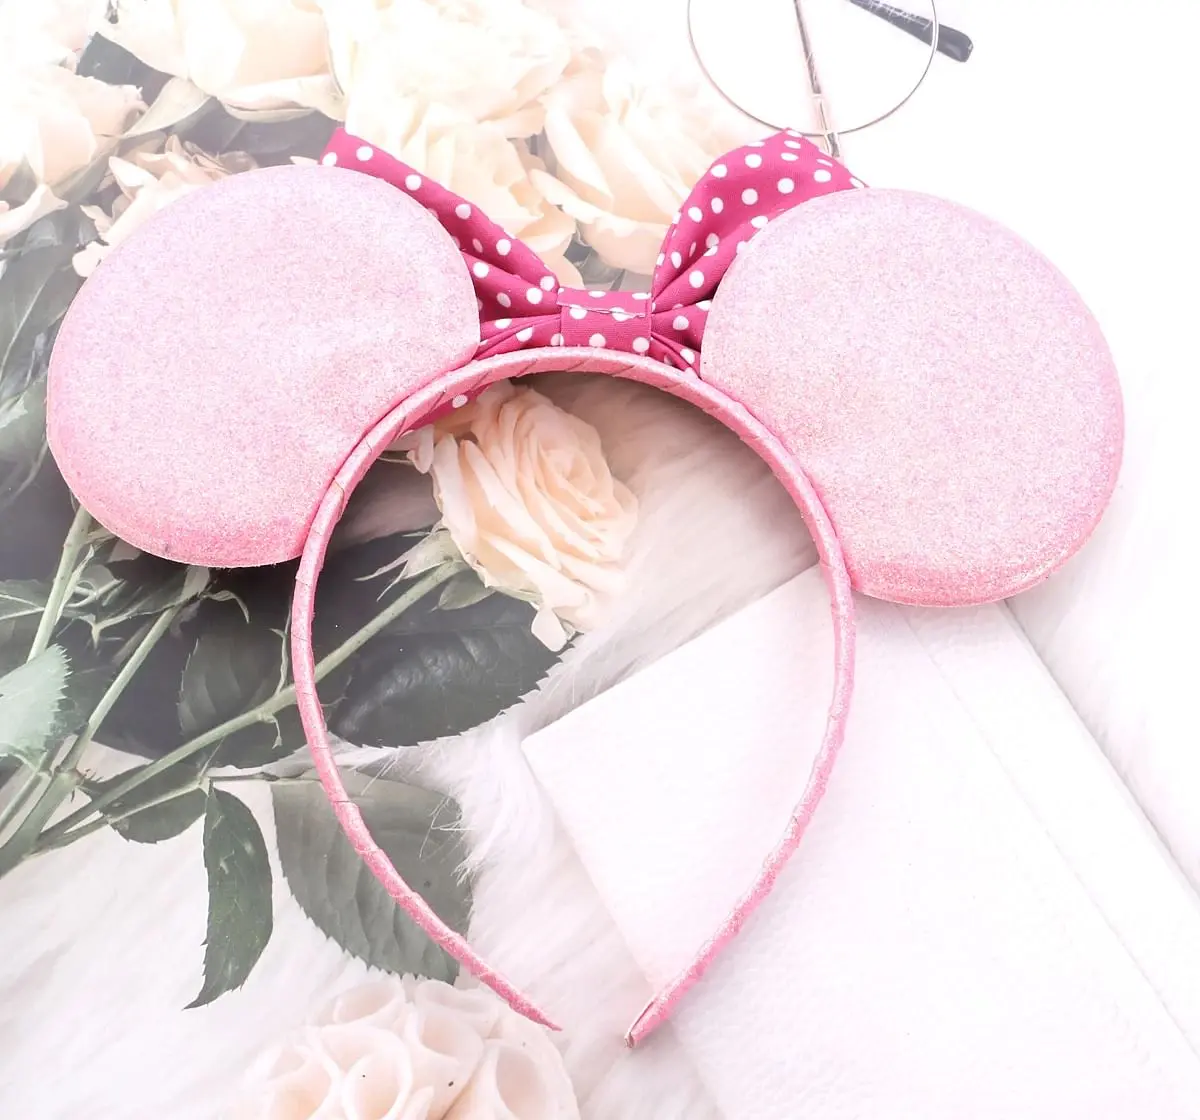 Minnie Mouse Pink Headband by Li'l Diva With A Polka Dot Bow For Girls 3 Years And Above, Pink